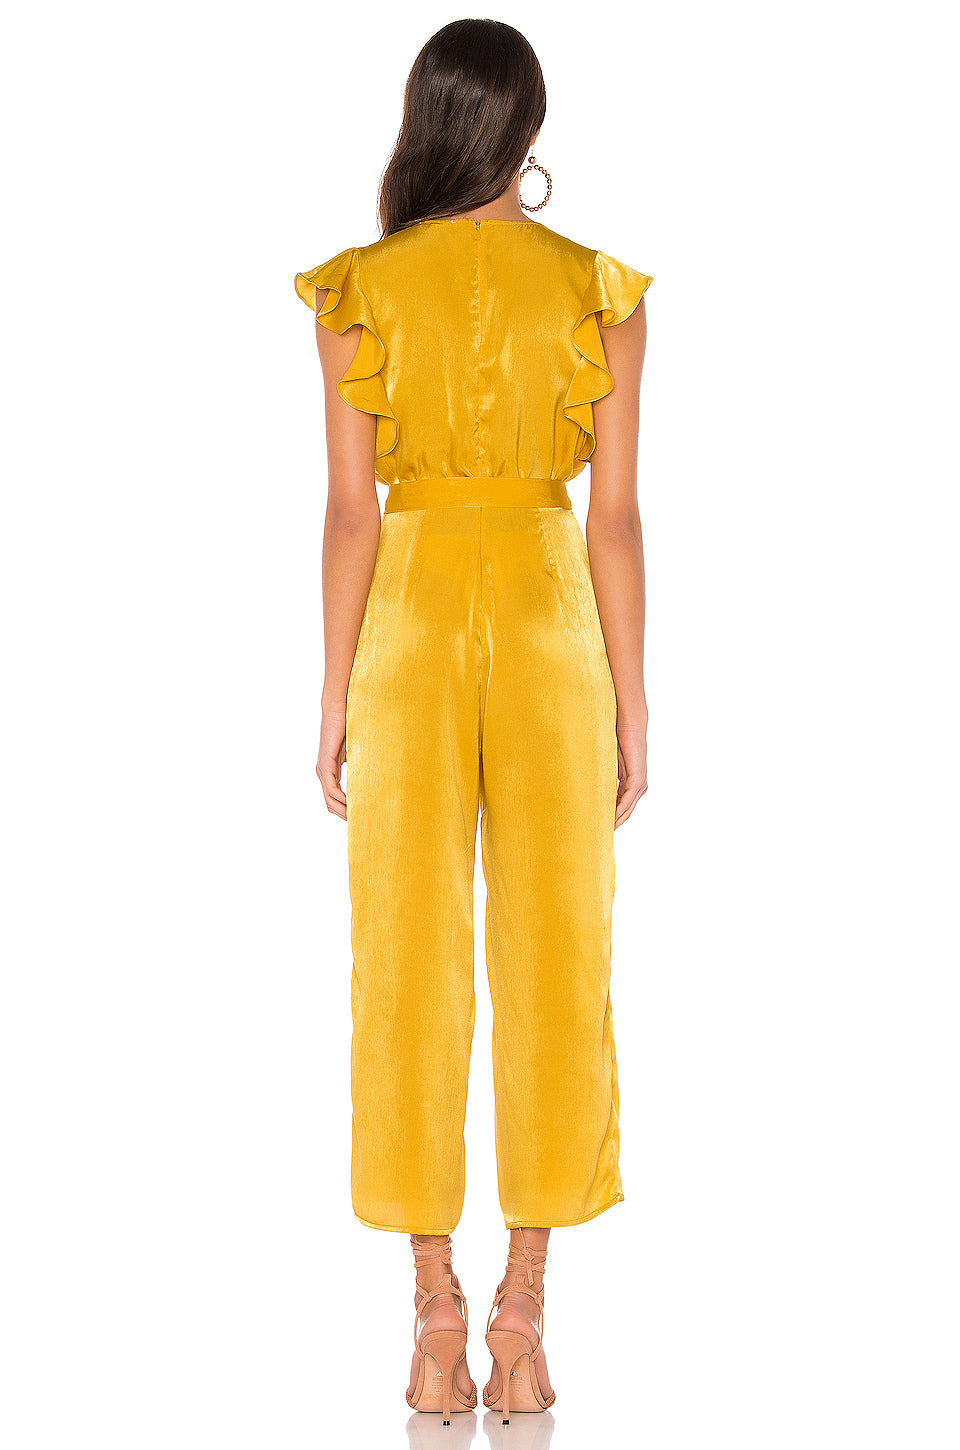 Sunset Jumpsuit in YELLOW